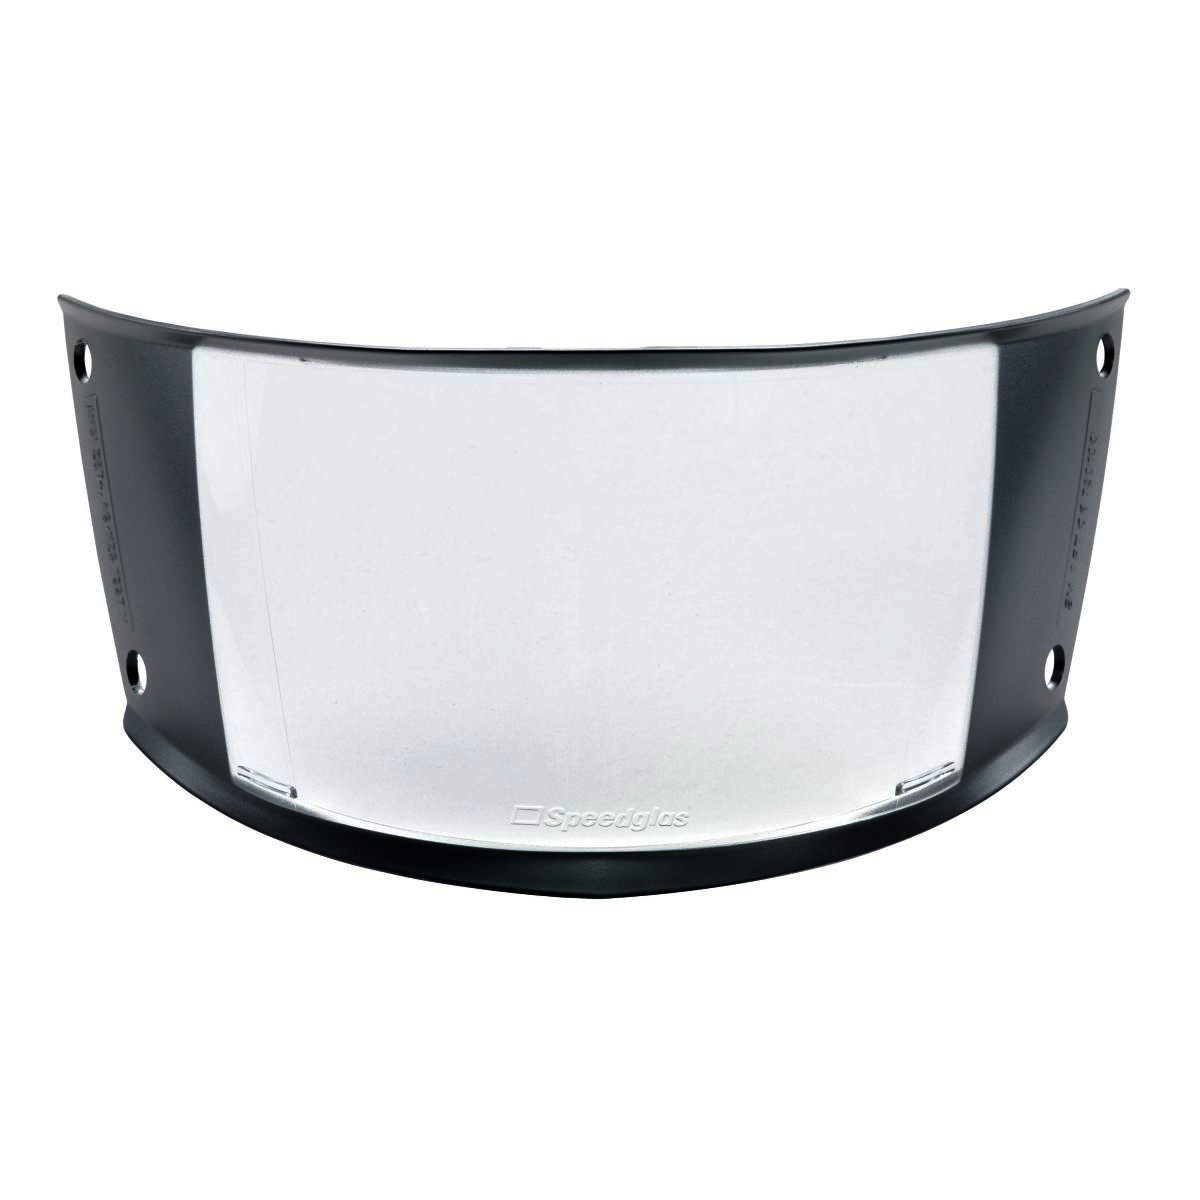 3M™ Speedglas™ Outside Protection Plate SL 05-0250-01, Scratch-Resistant